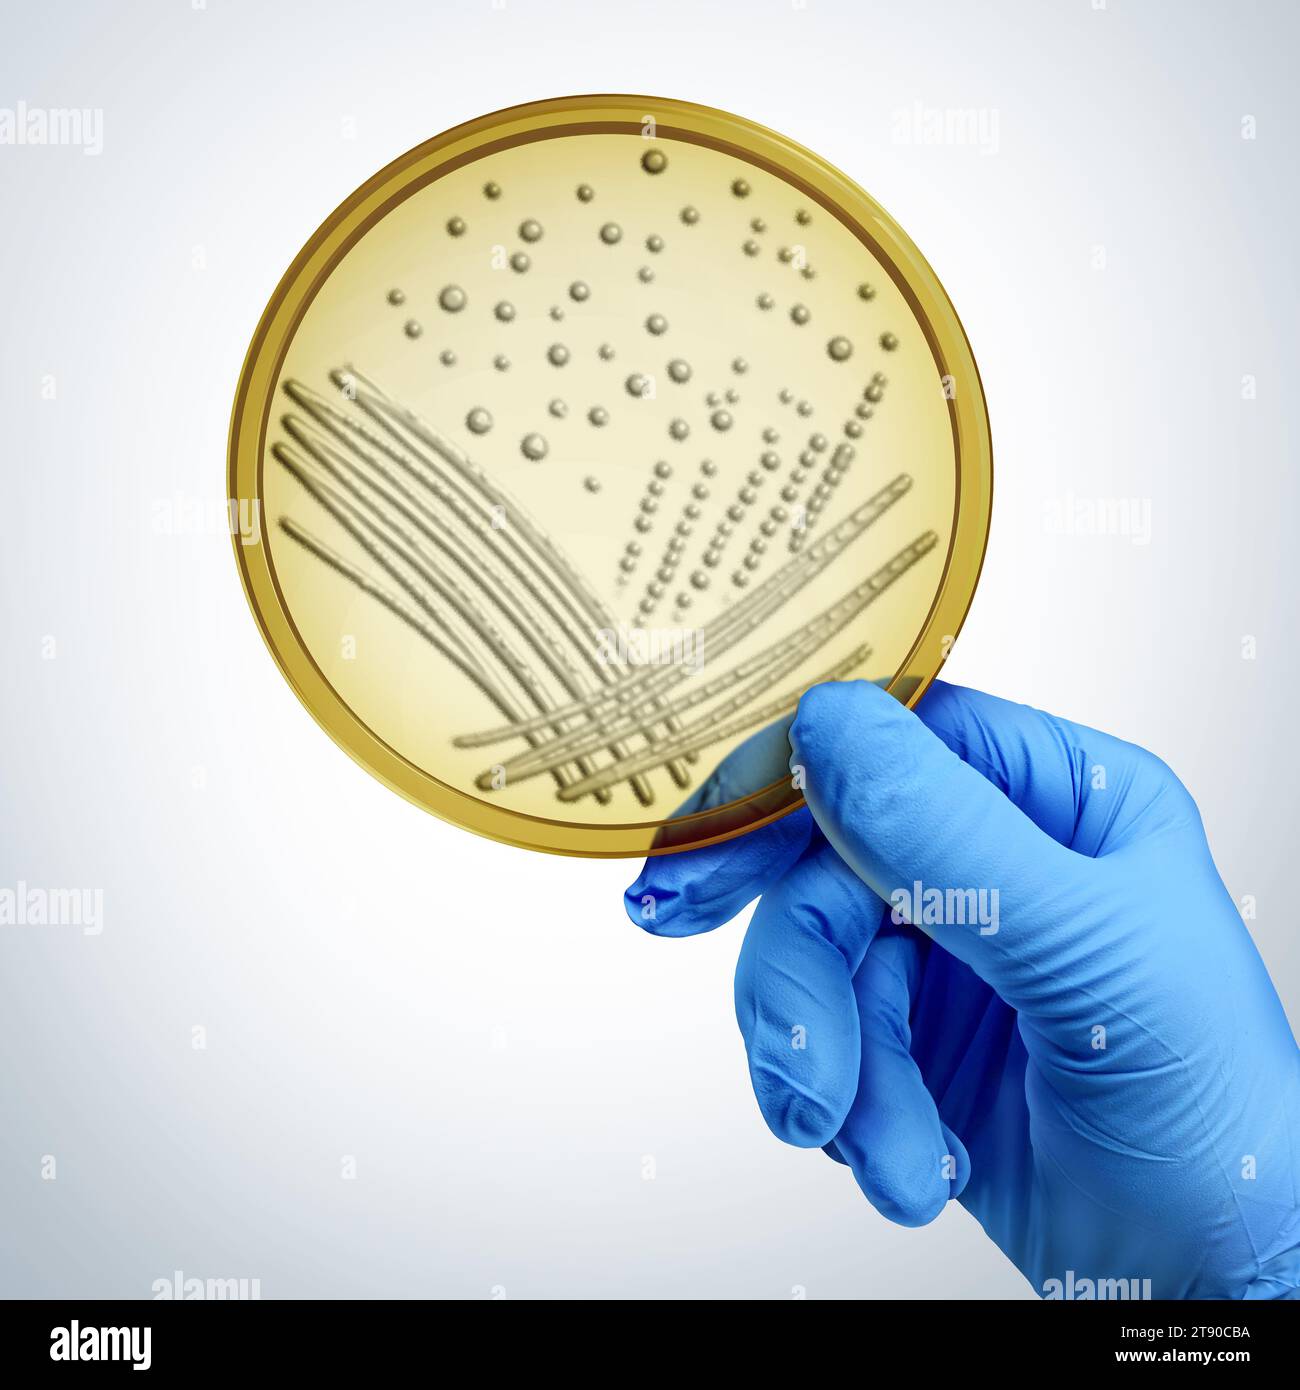 Hand Holding A Petri Dish as a scientist or biologist with a cultured growth of fungus as a science symbol for researching microbiology Stock Photo